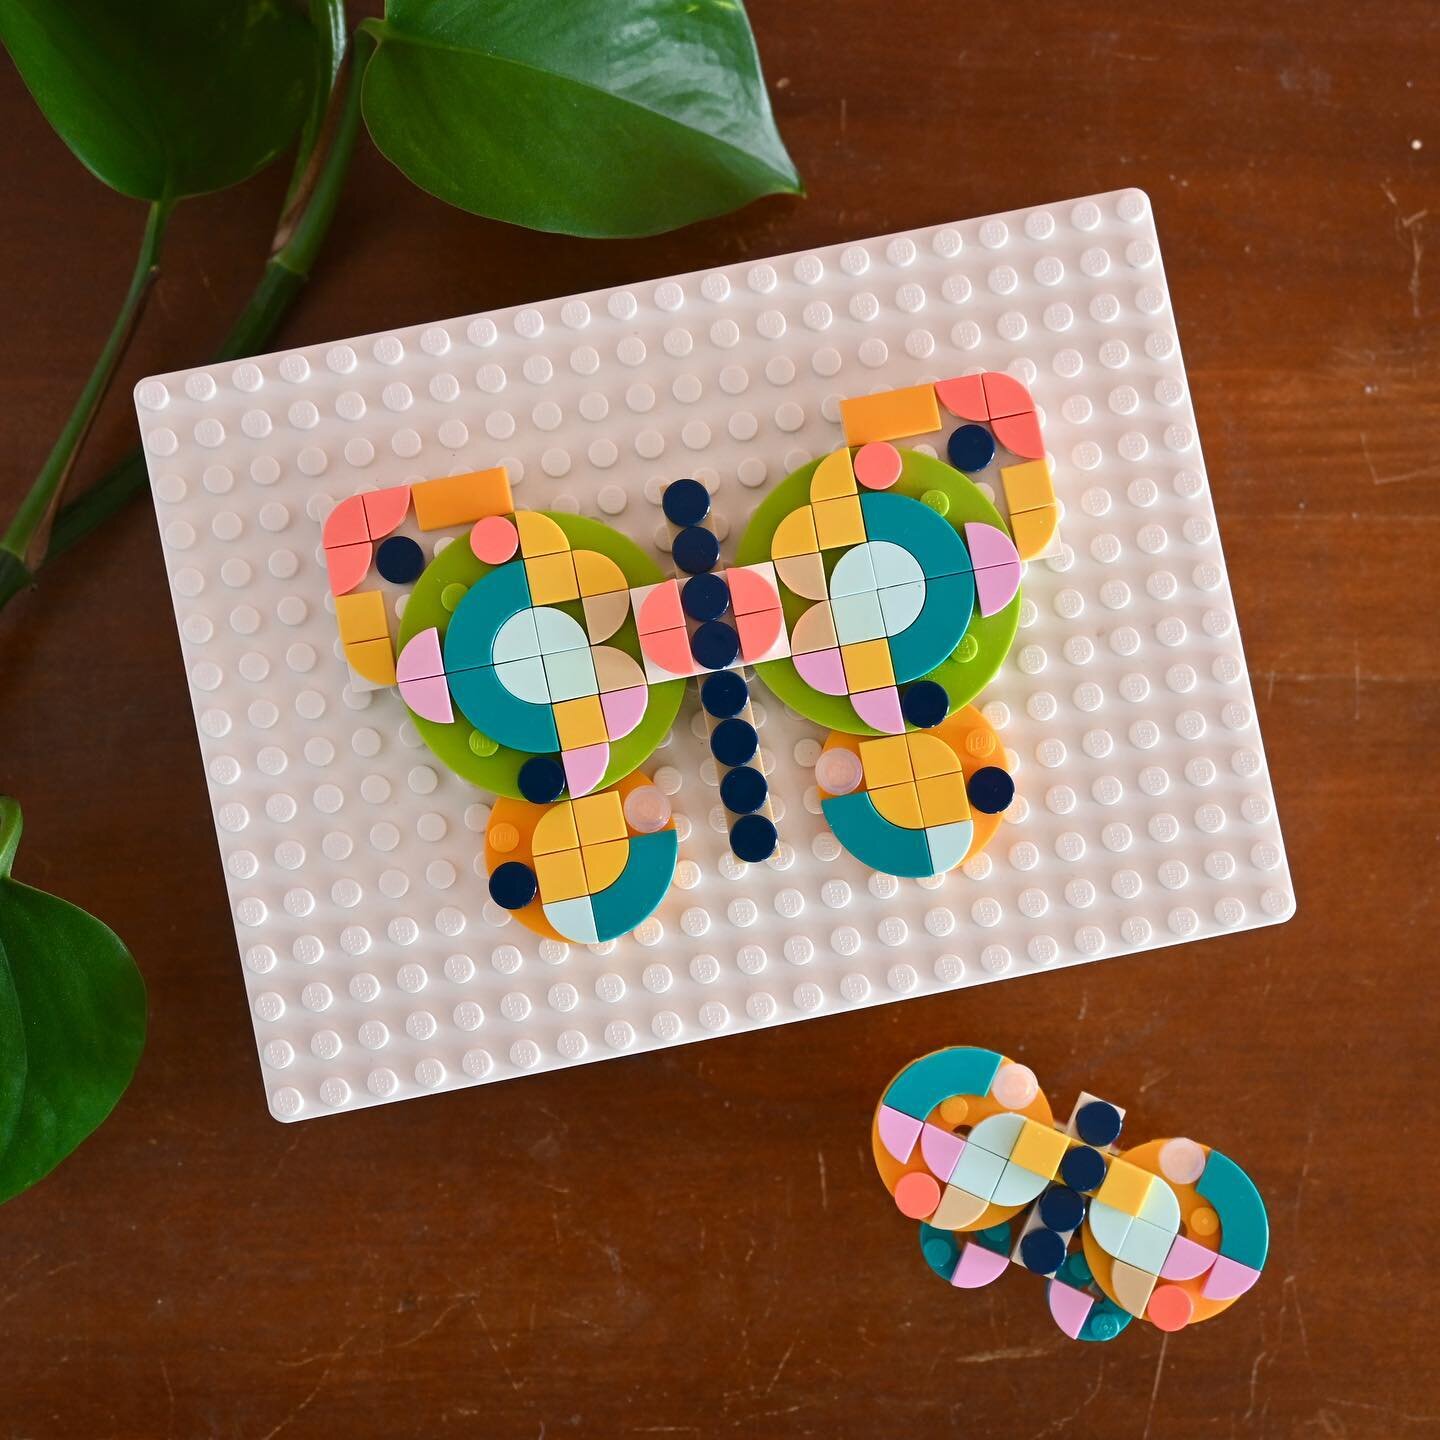 DOTTY MAY Butterflies - I created these butterflies three years ago with @lego and Lego DOTS. I added the big one to the top of a Lego @ikea Bygglek box.

I call my collection of Lego DOTS makes, DOTTY MAY - these include things I&rsquo;ve made with 